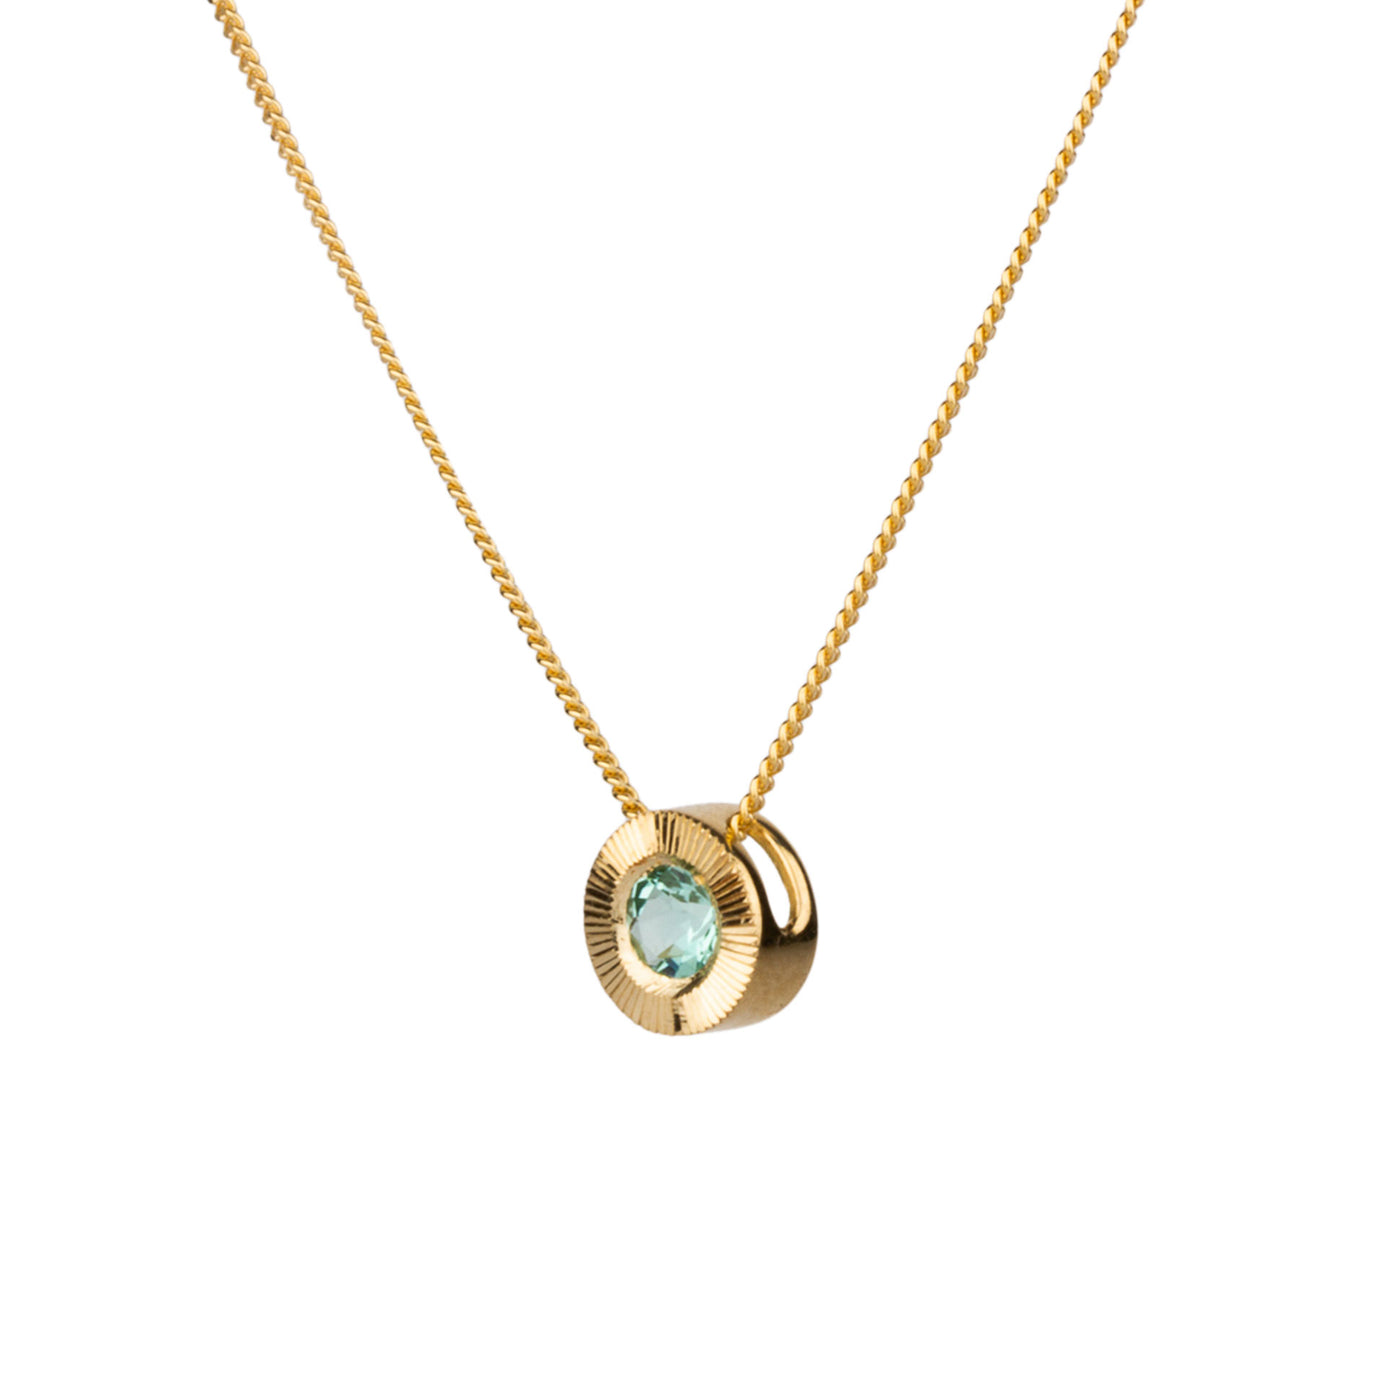 Side view 14k yellow gold medium Aurora necklace with a round seafoam green tourmaline center and engraved rays halo border on a white background